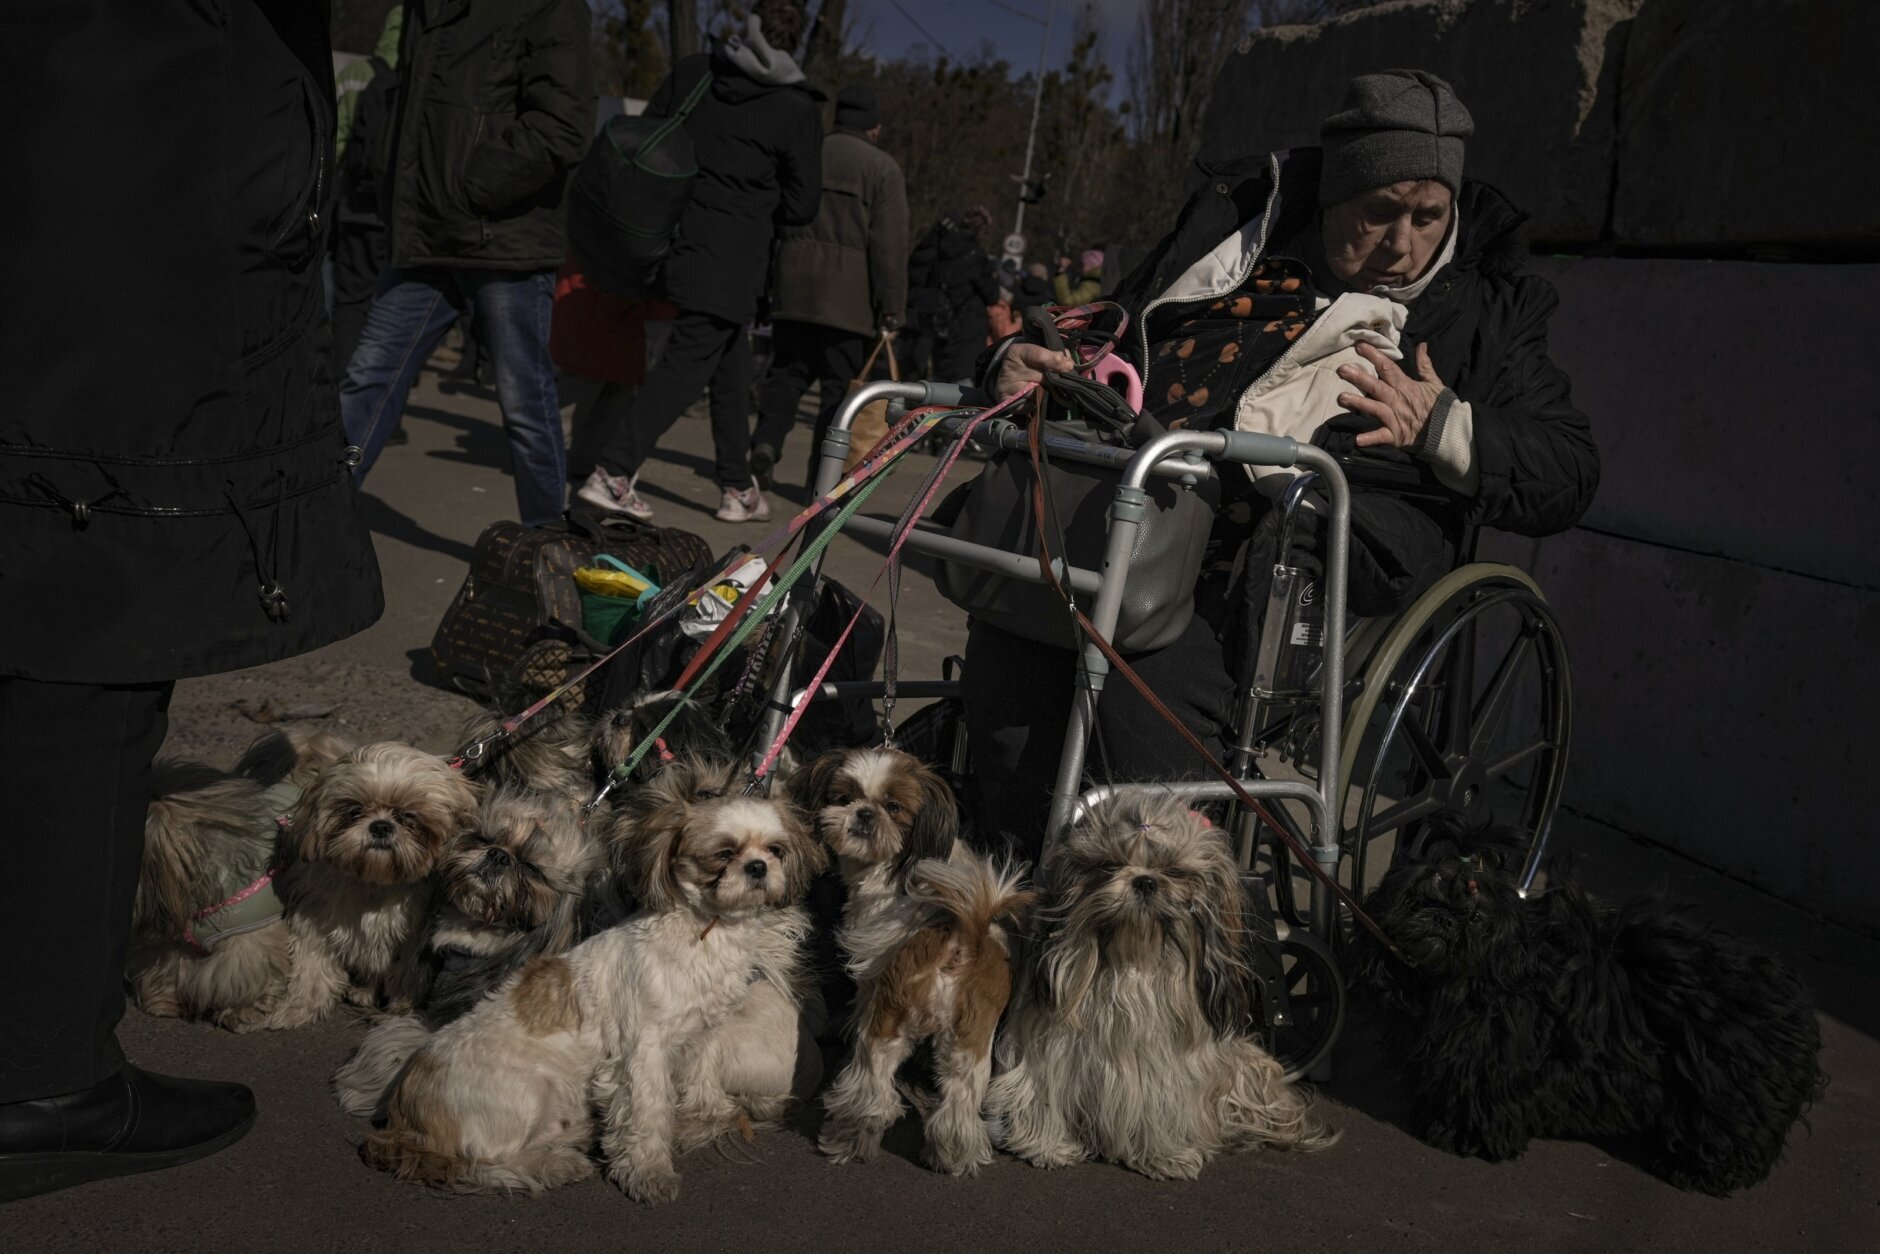 Antonina, 84, sits in a wheelchair after being evacuated along with her twelve dogs from Irpin, at a triage point in Kyiv, Ukraine, Friday, March 11, 2022. (AP Photo/Vadim Ghirda)